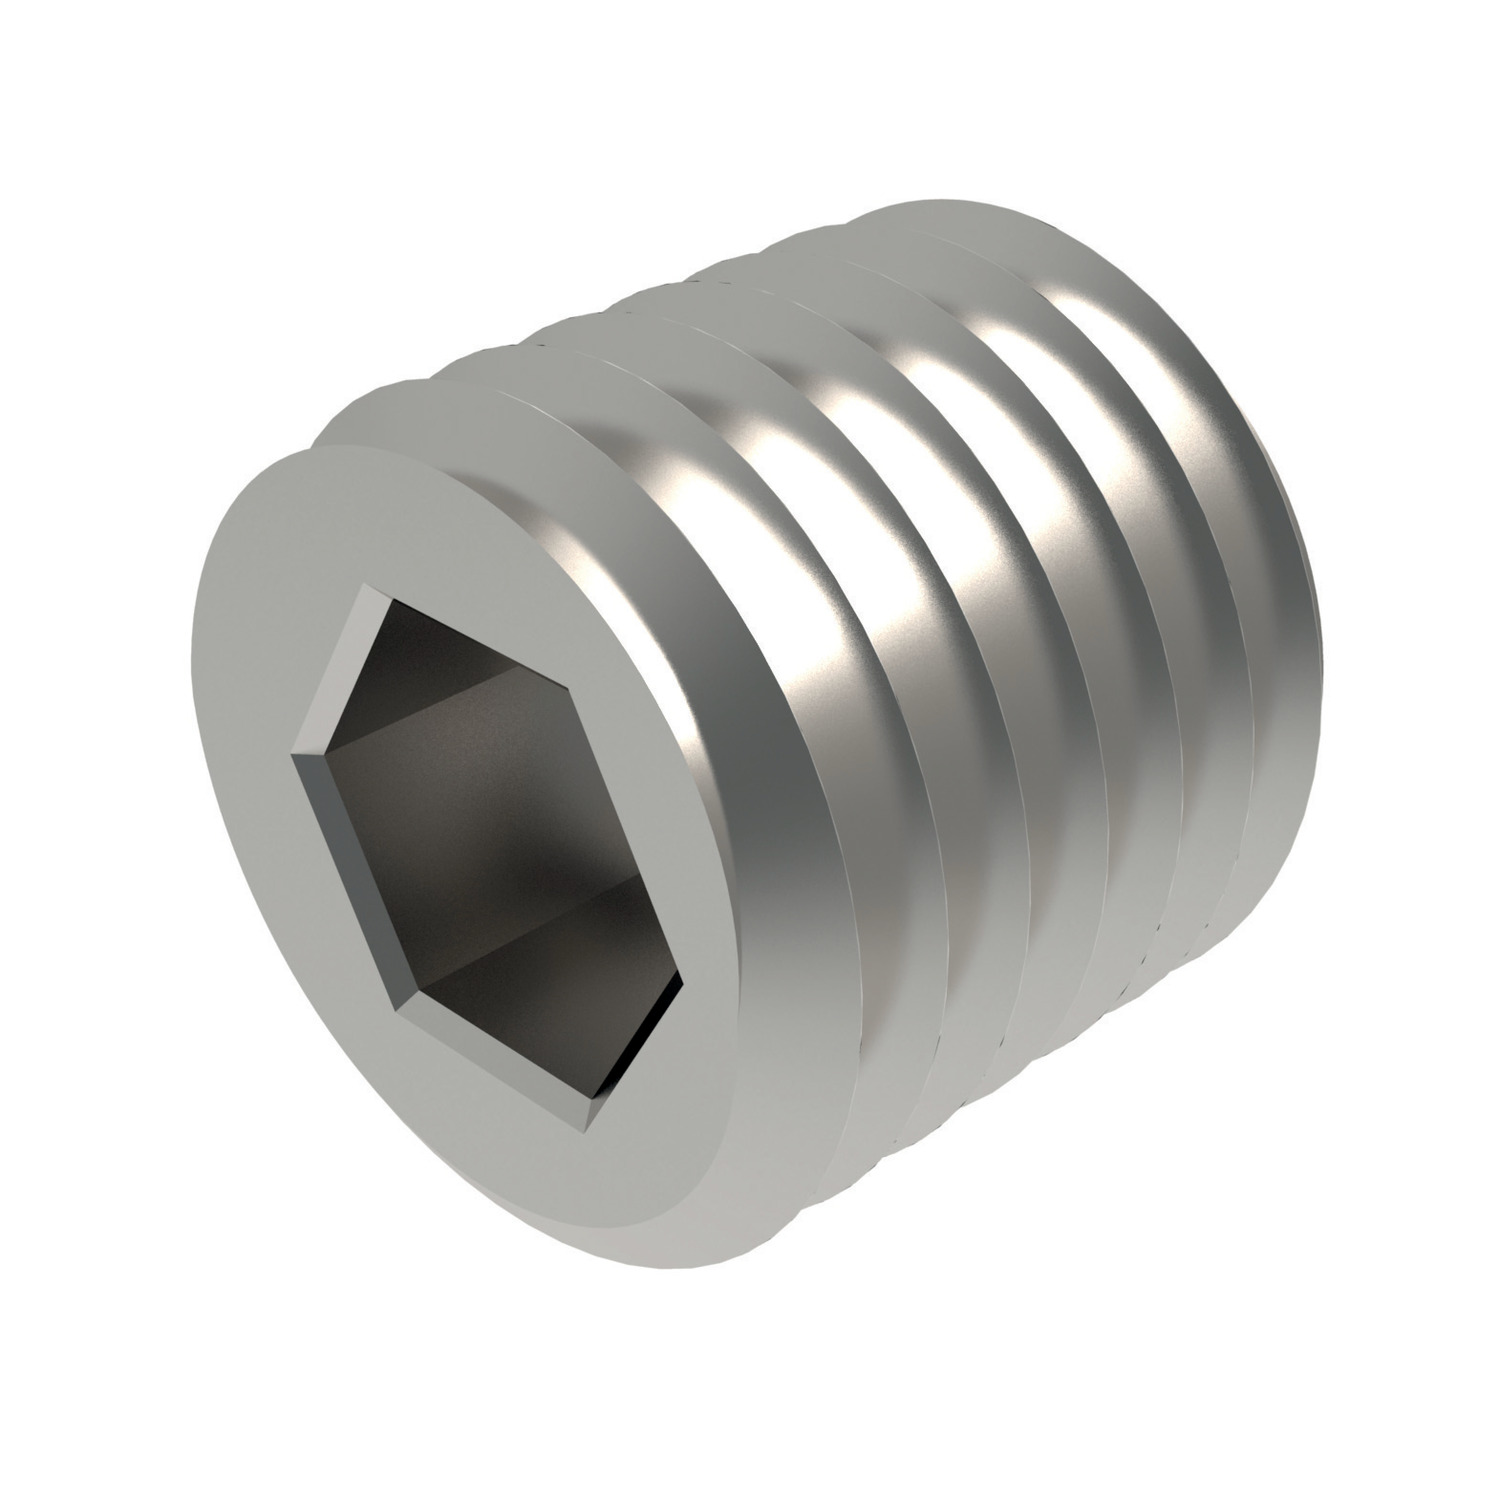 P0199.080-029-A2 Threaded Restrictor M8x1. 2.92 orifice A2 stainless steel. DANGER: Ensure this part is installed according to instructions in the product data sheet and installation notes. Holes must be completely free of oil, grease and debris.